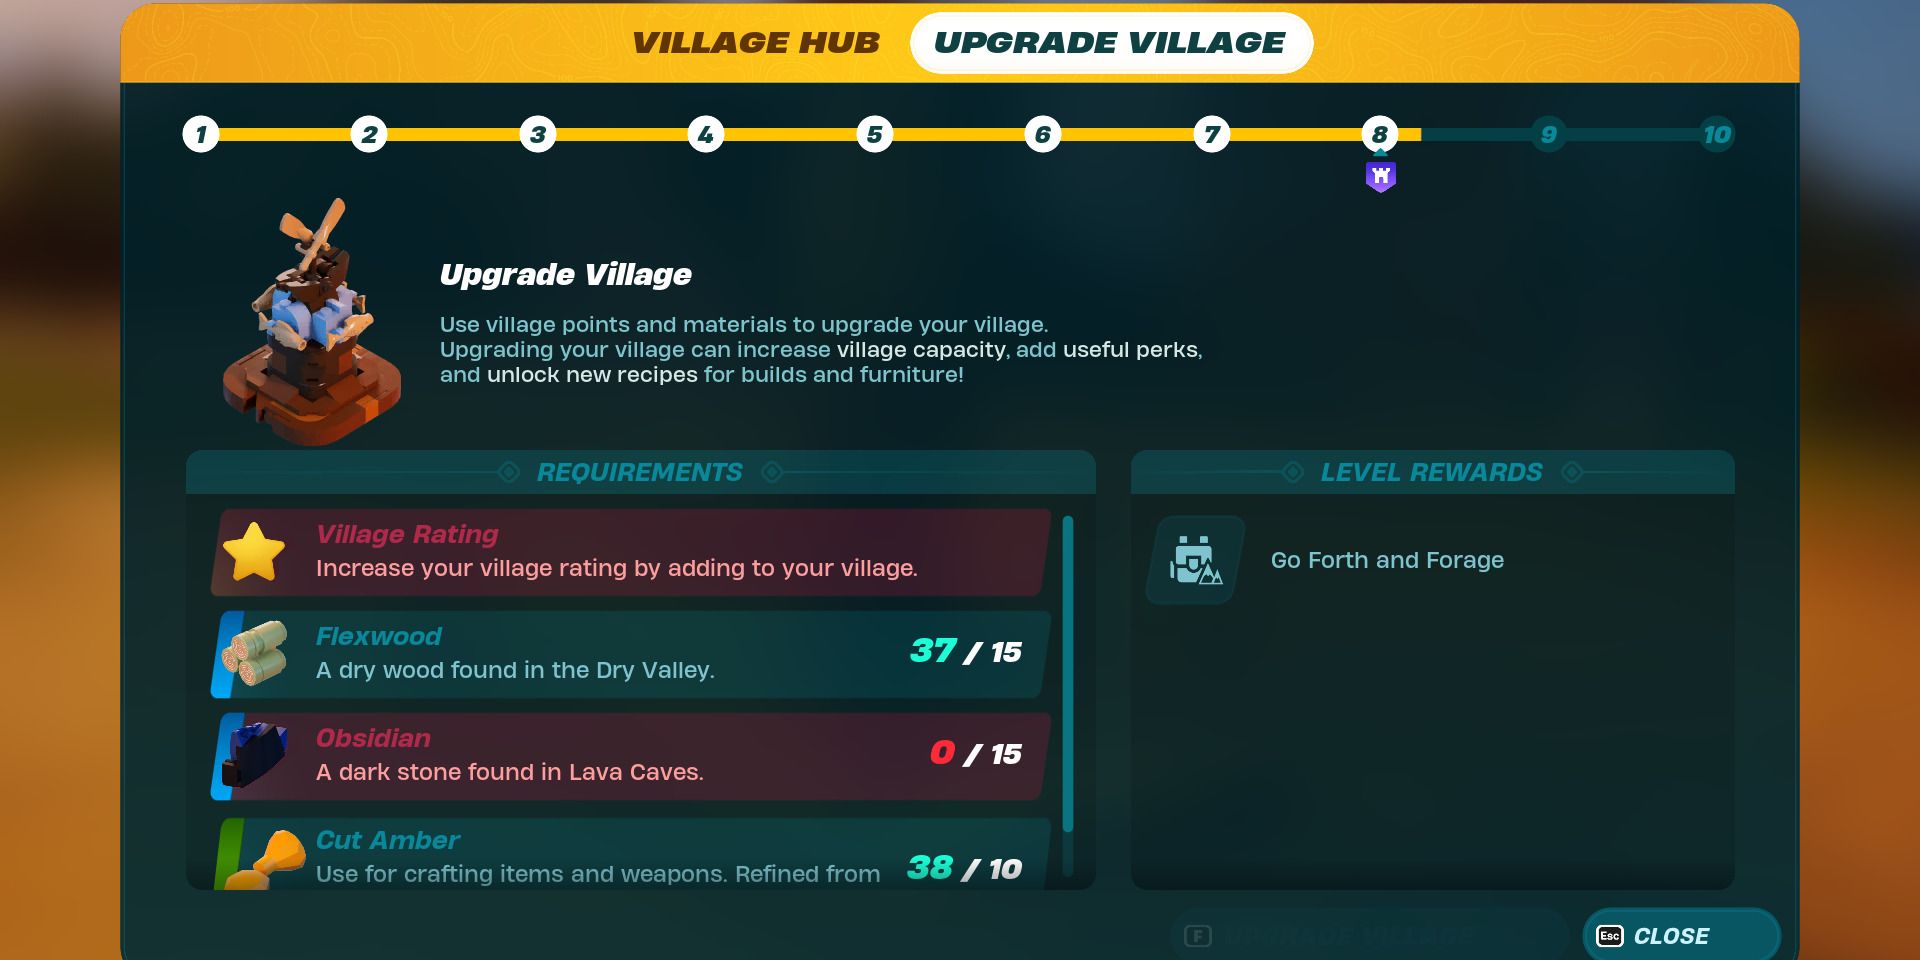 Image of the required materials to upgrade your village to Level 9 in Lego Fortnite